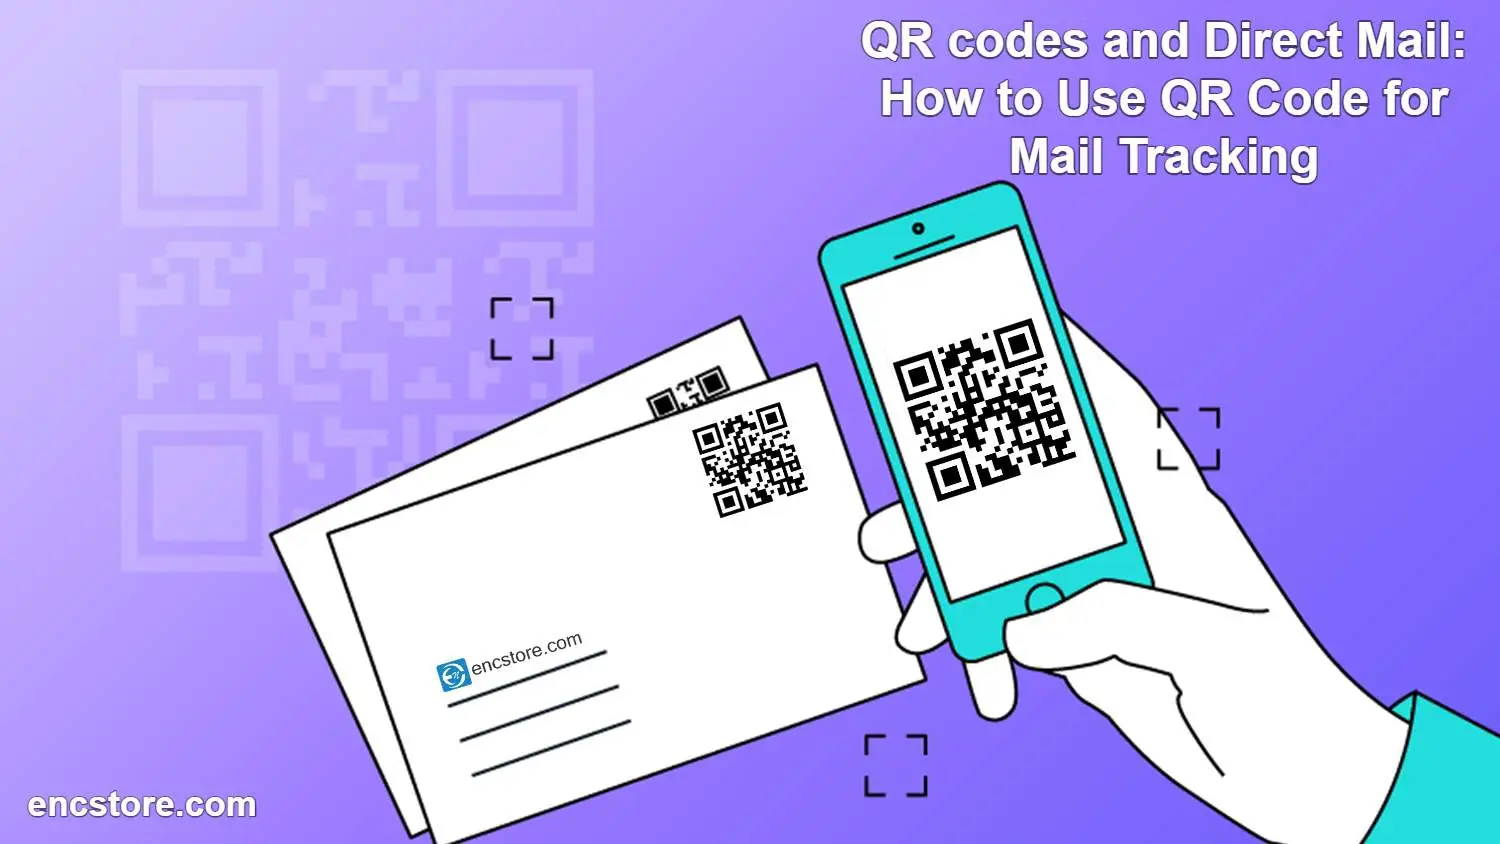 QR codes and Direct Mail